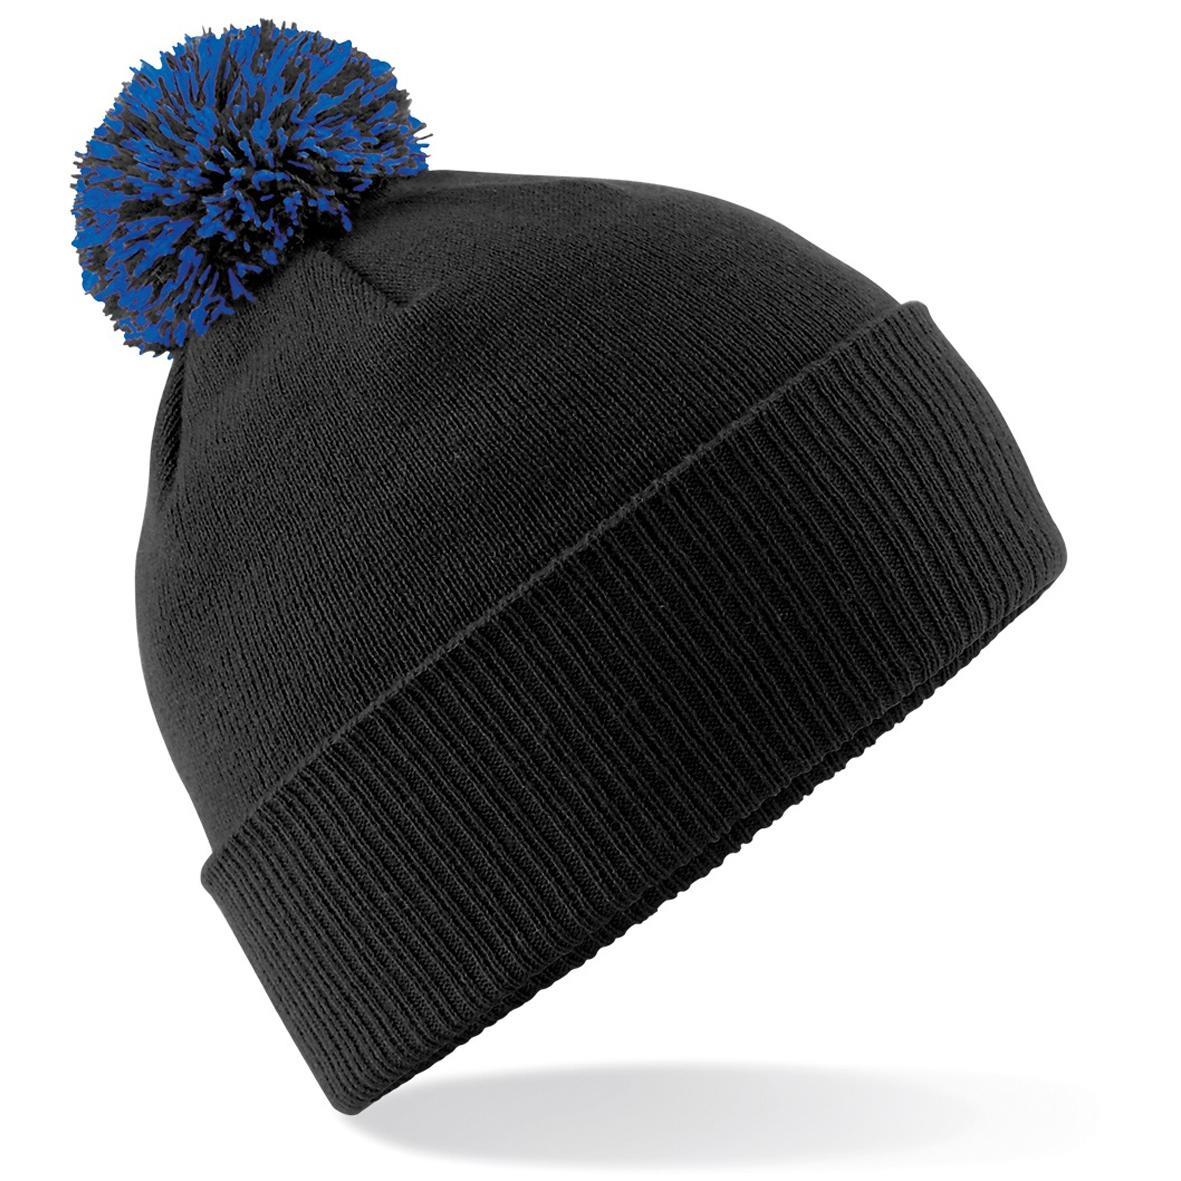 Beechfield Girls Snowstar Duo Extreme Winter Hat (Black/Bright Royal) (One Size)